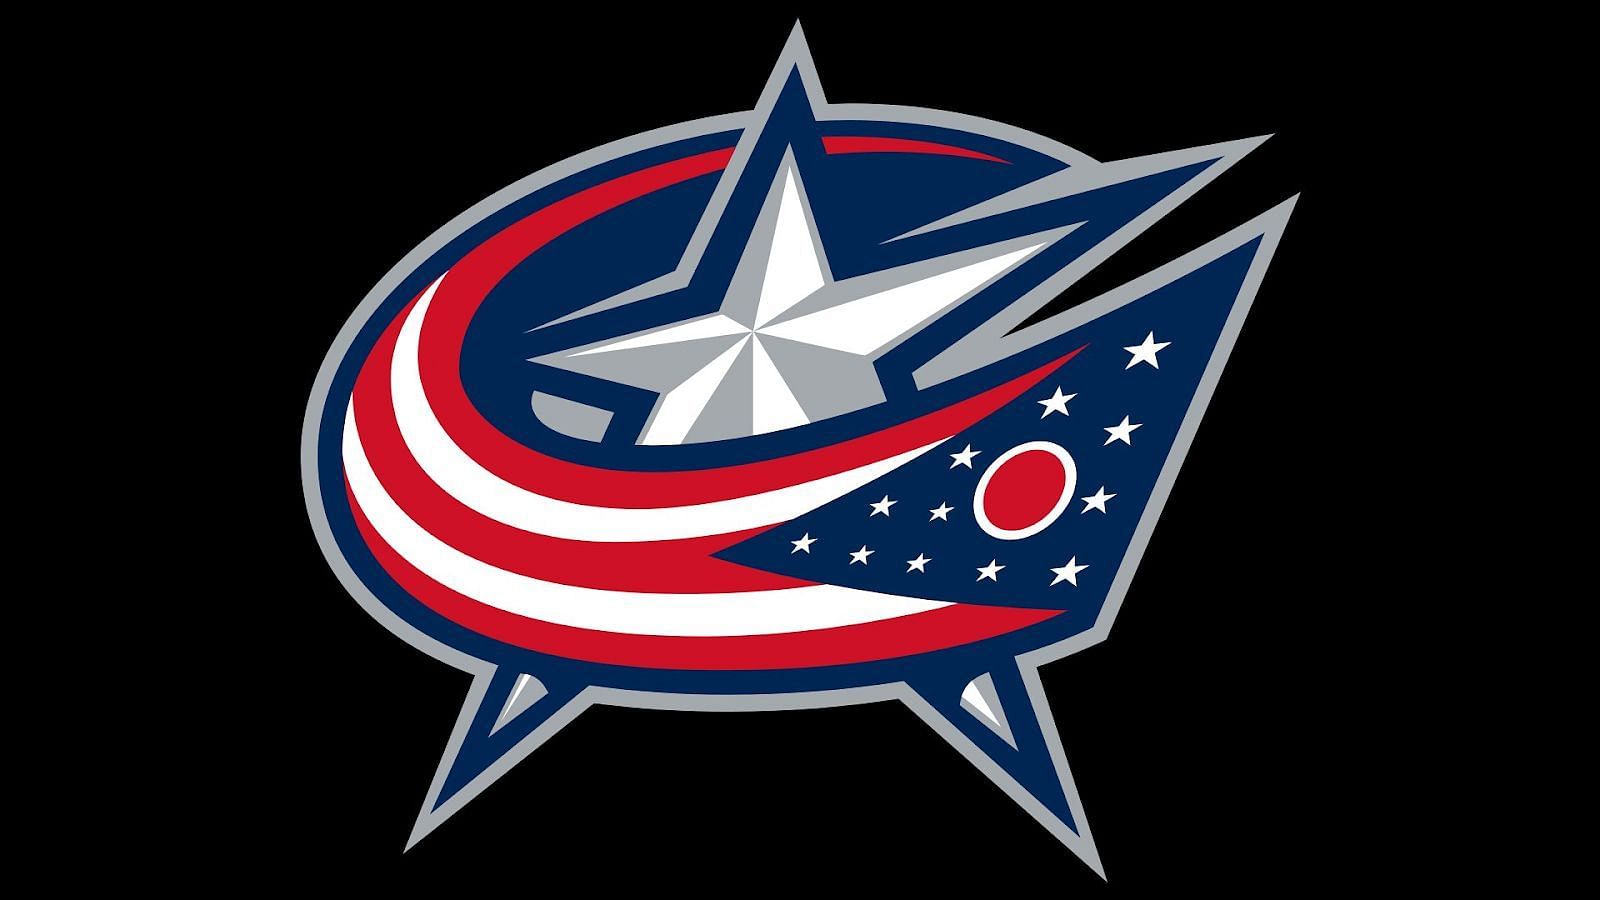 Columbus Blue Jackets News, Schedule, Roster, & More